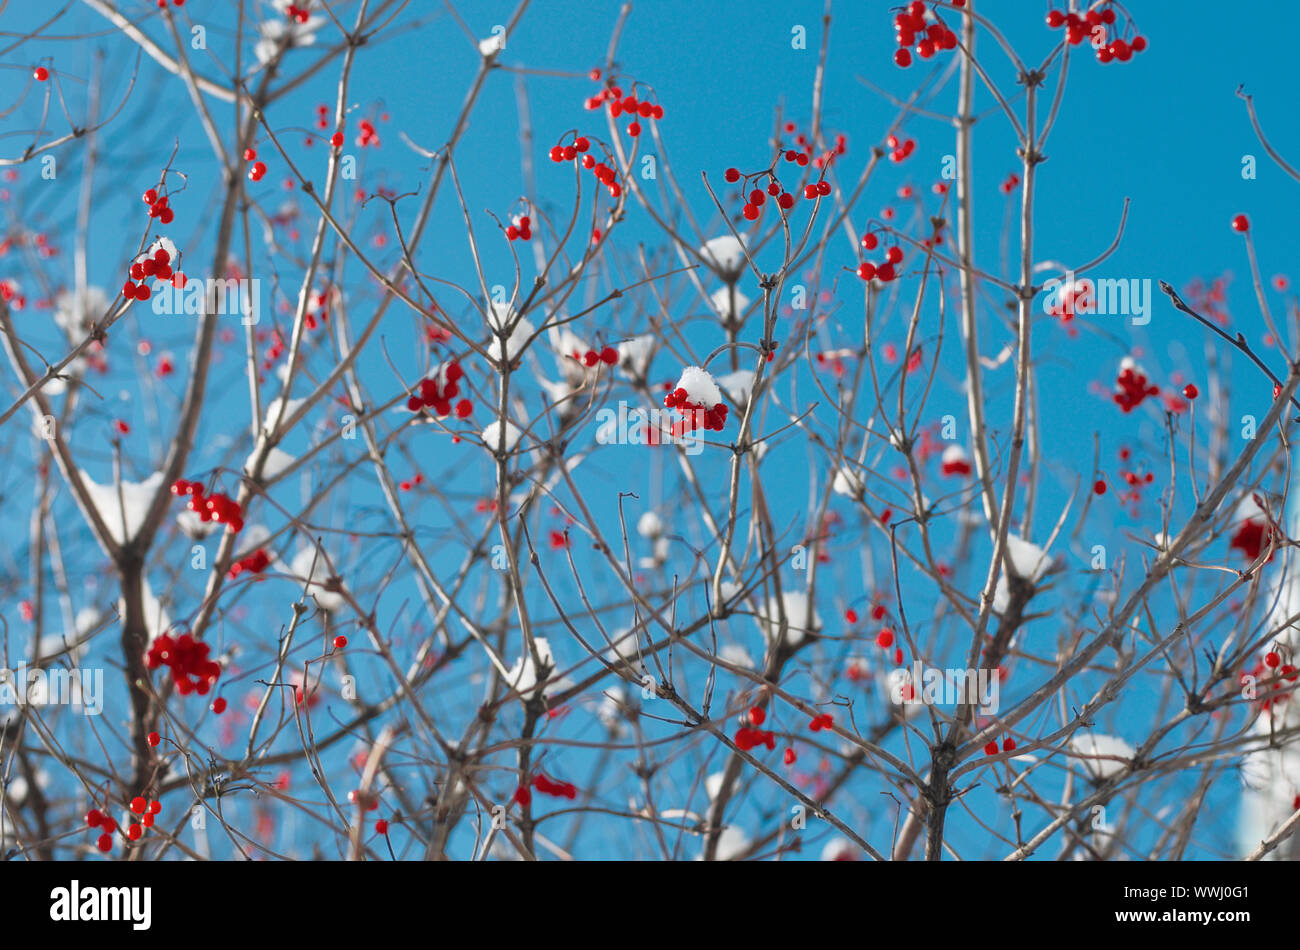 Viburnum bush with clusters of red berries on dry branches in the background of the blue sky Stock Photo